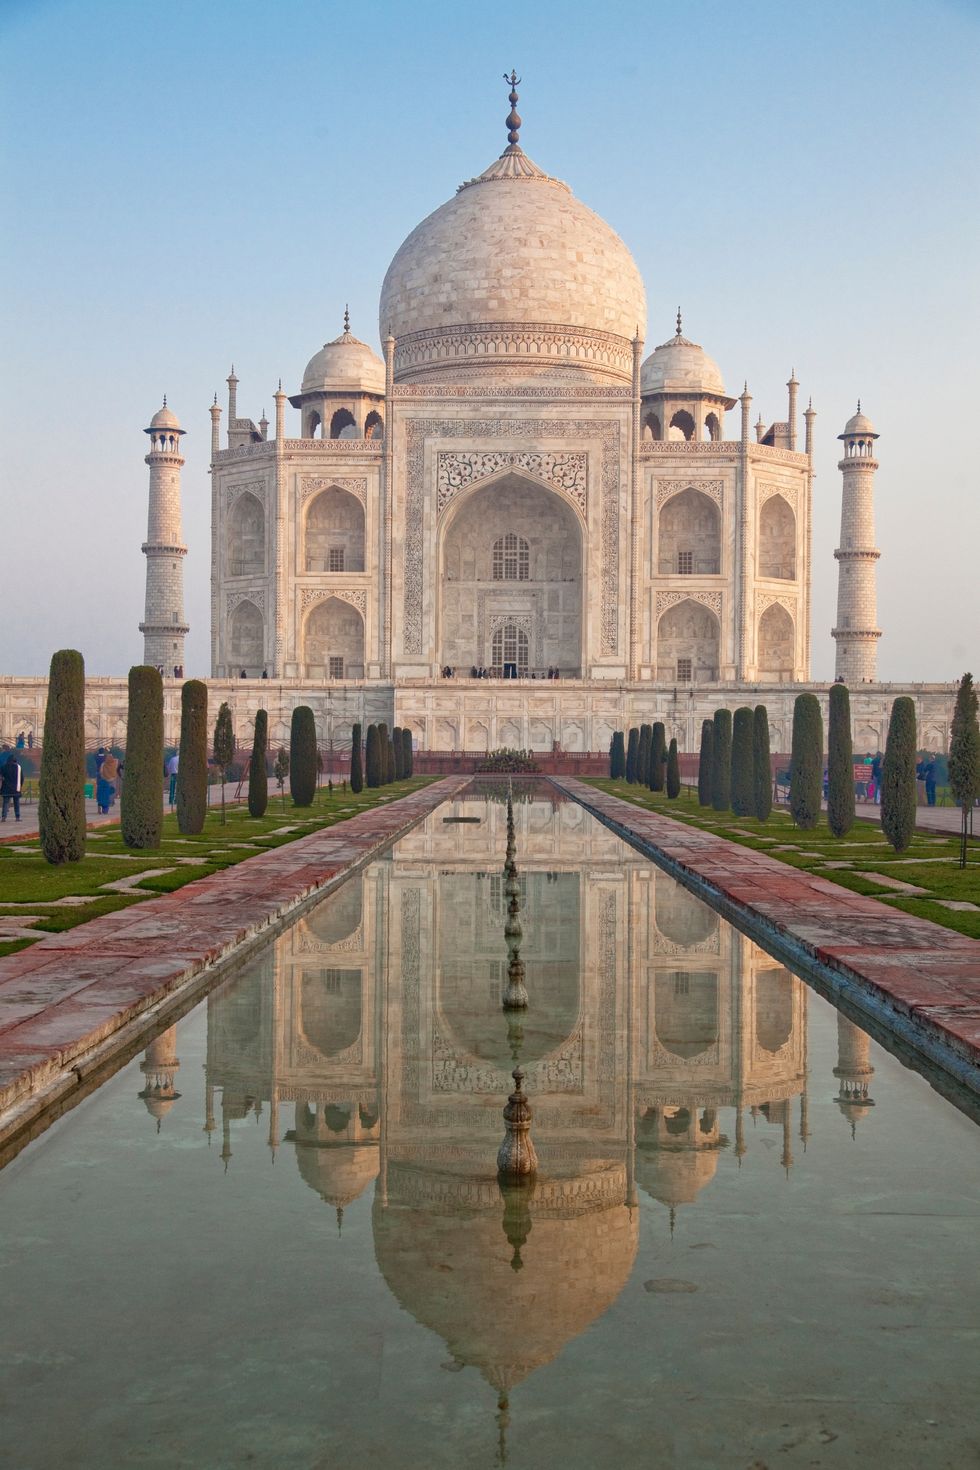 Landmark, Reflecting pool, Reflection, Historic site, Symmetry, Holy places, Mausoleum, Building, Wonders of the world, Dome, 